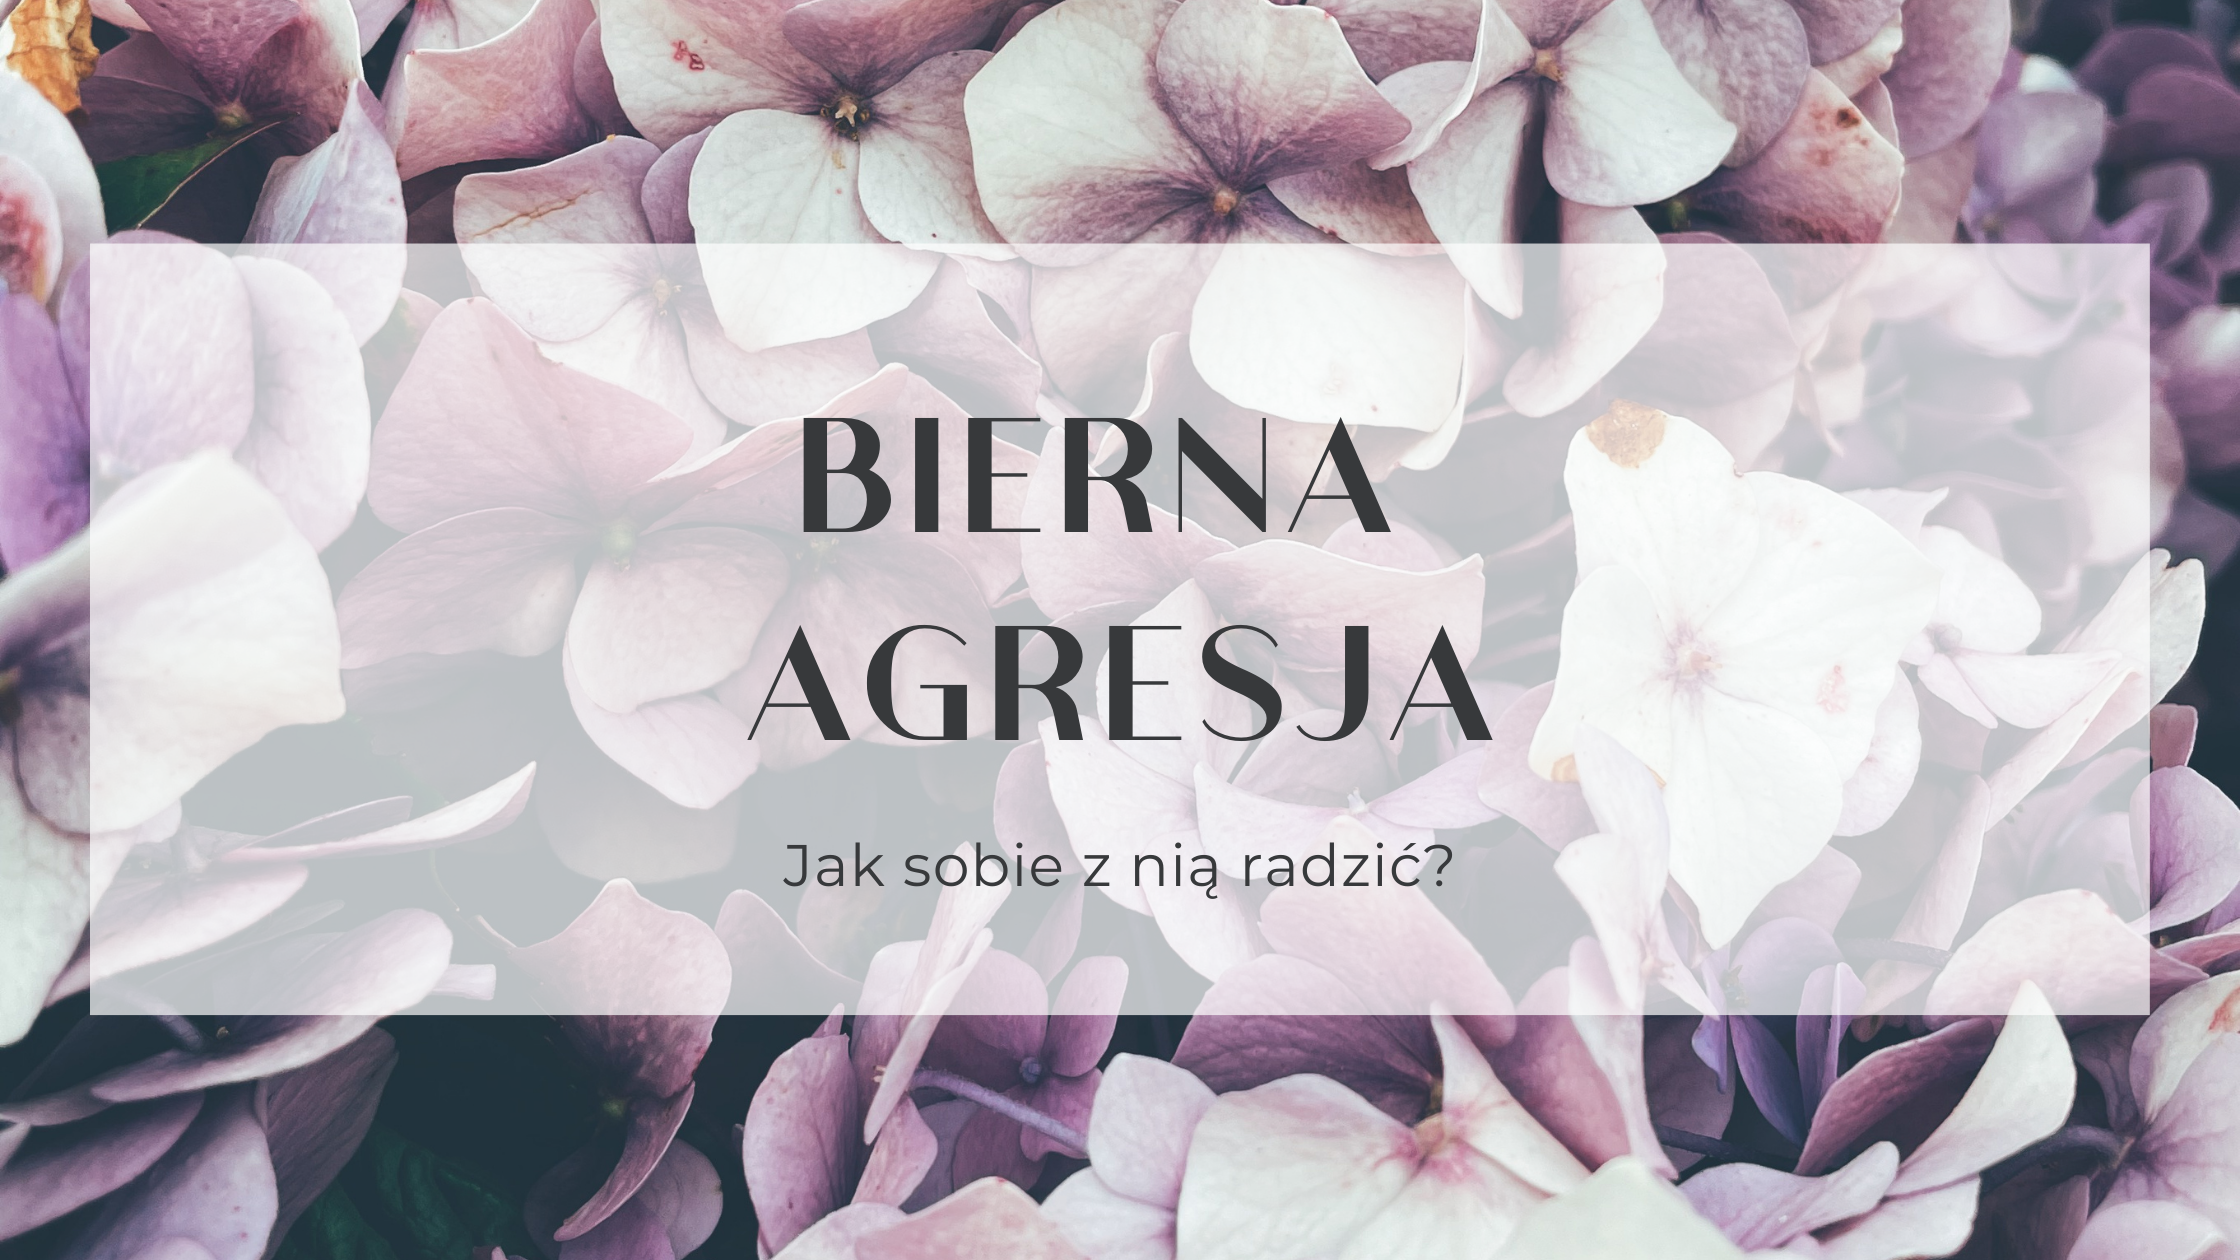 You are currently viewing Bierna Agresja